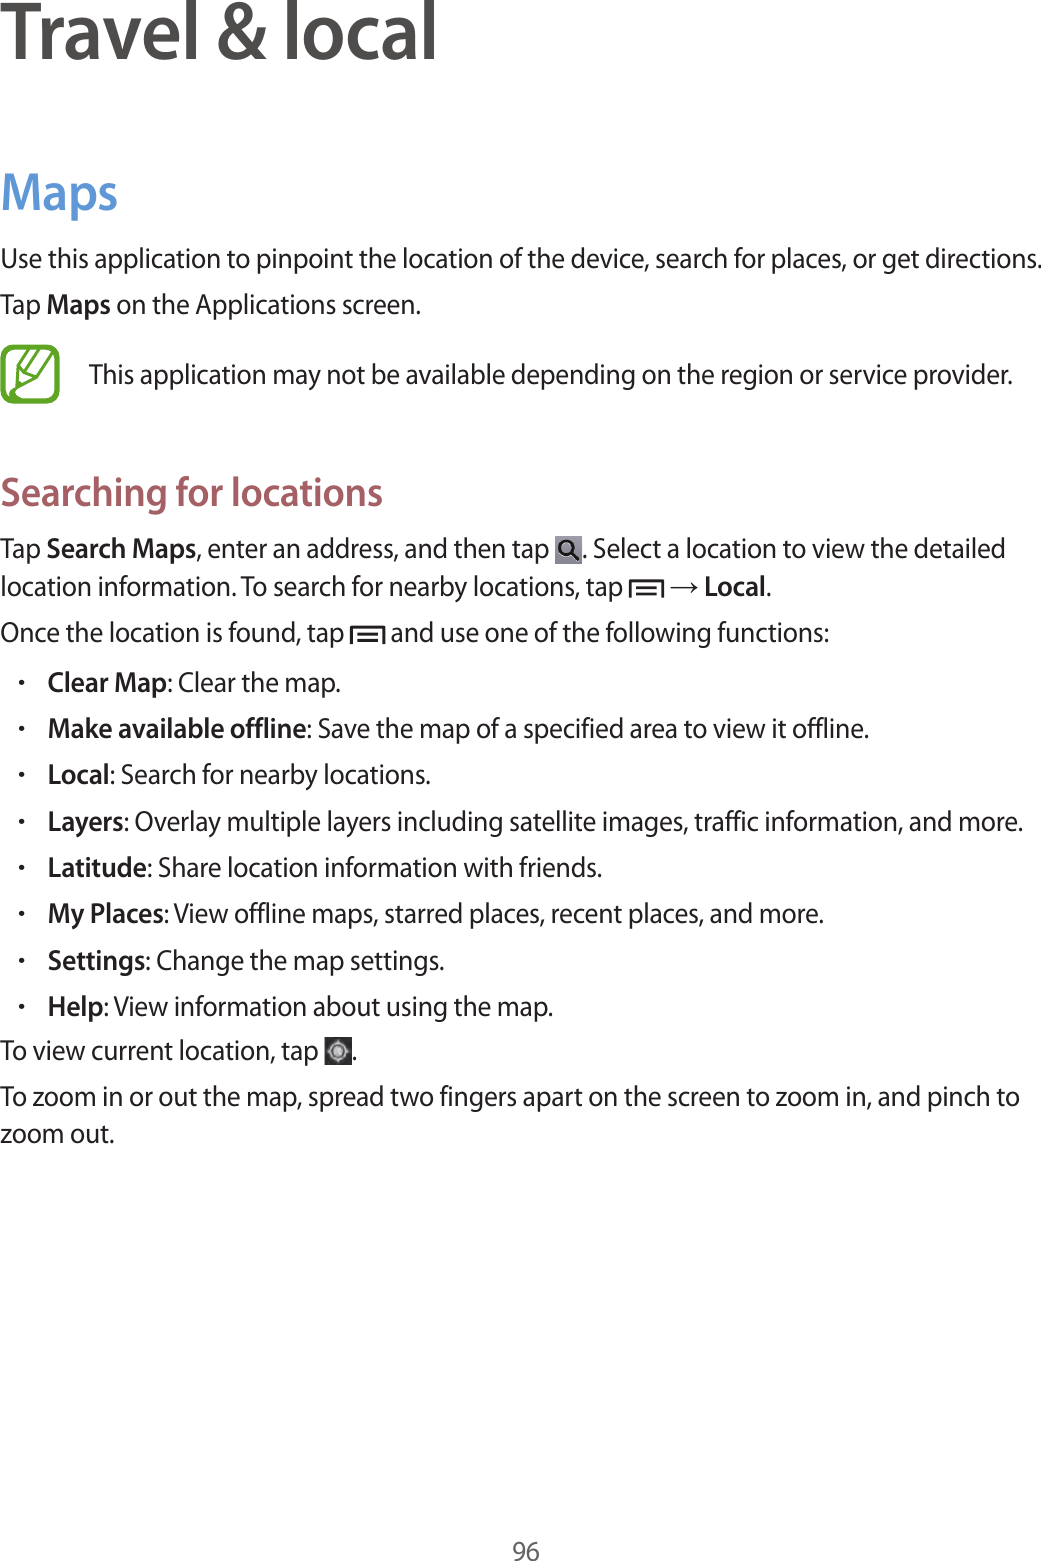 96Travel &amp; localMapsUse this application to pinpoint the location of the device, search for places, or get directions.Tap Maps on the Applications screen.This application may not be available depending on the region or service provider.Searching for locationsTap Search Maps, enter an address, and then tap  . Select a location to view the detailed location information. To search for nearby locations, tap   → Local.Once the location is found, tap   and use one of the following functions:•Clear Map: Clear the map.•Make available offline: Save the map of a specified area to view it offline.•Local: Search for nearby locations.•Layers: Overlay multiple layers including satellite images, traffic information, and more.•Latitude: Share location information with friends.•My Places: View offline maps, starred places, recent places, and more.•Settings: Change the map settings.•Help: View information about using the map.To view current location, tap  .To zoom in or out the map, spread two fingers apart on the screen to zoom in, and pinch to zoom out.